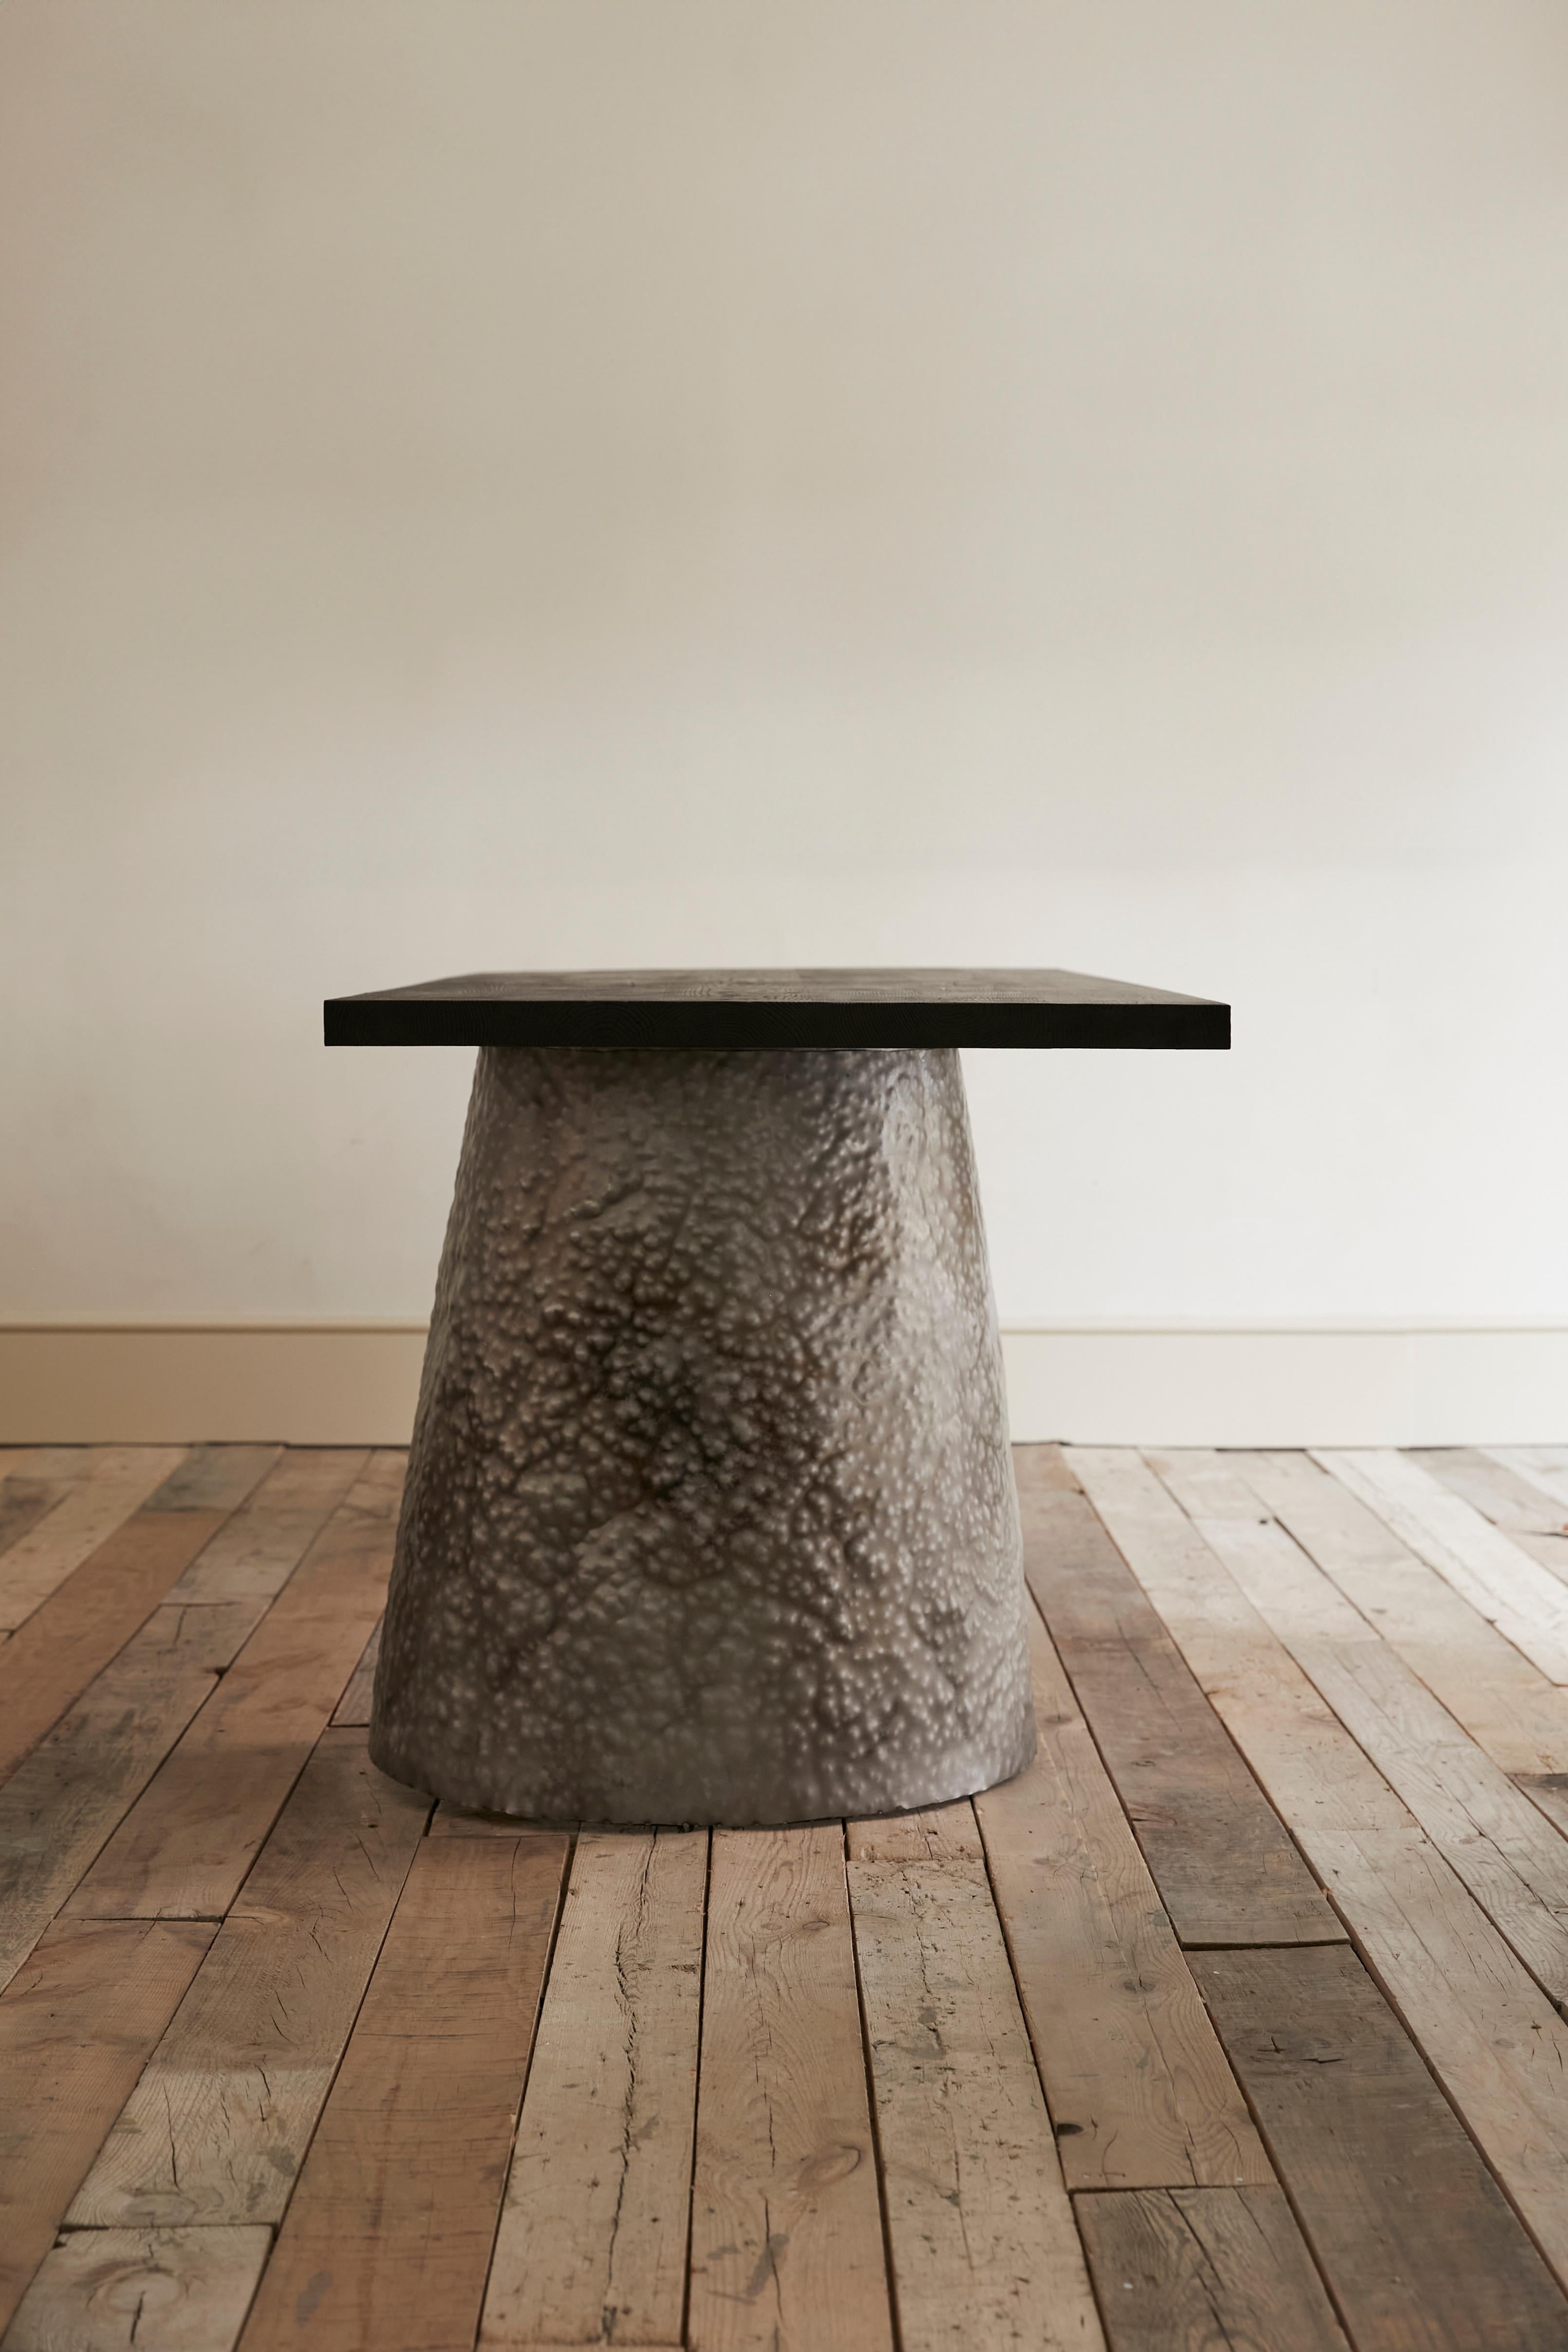 Steel Bruo hammered steel & burned wood dining table and stools, contemporary handmade For Sale